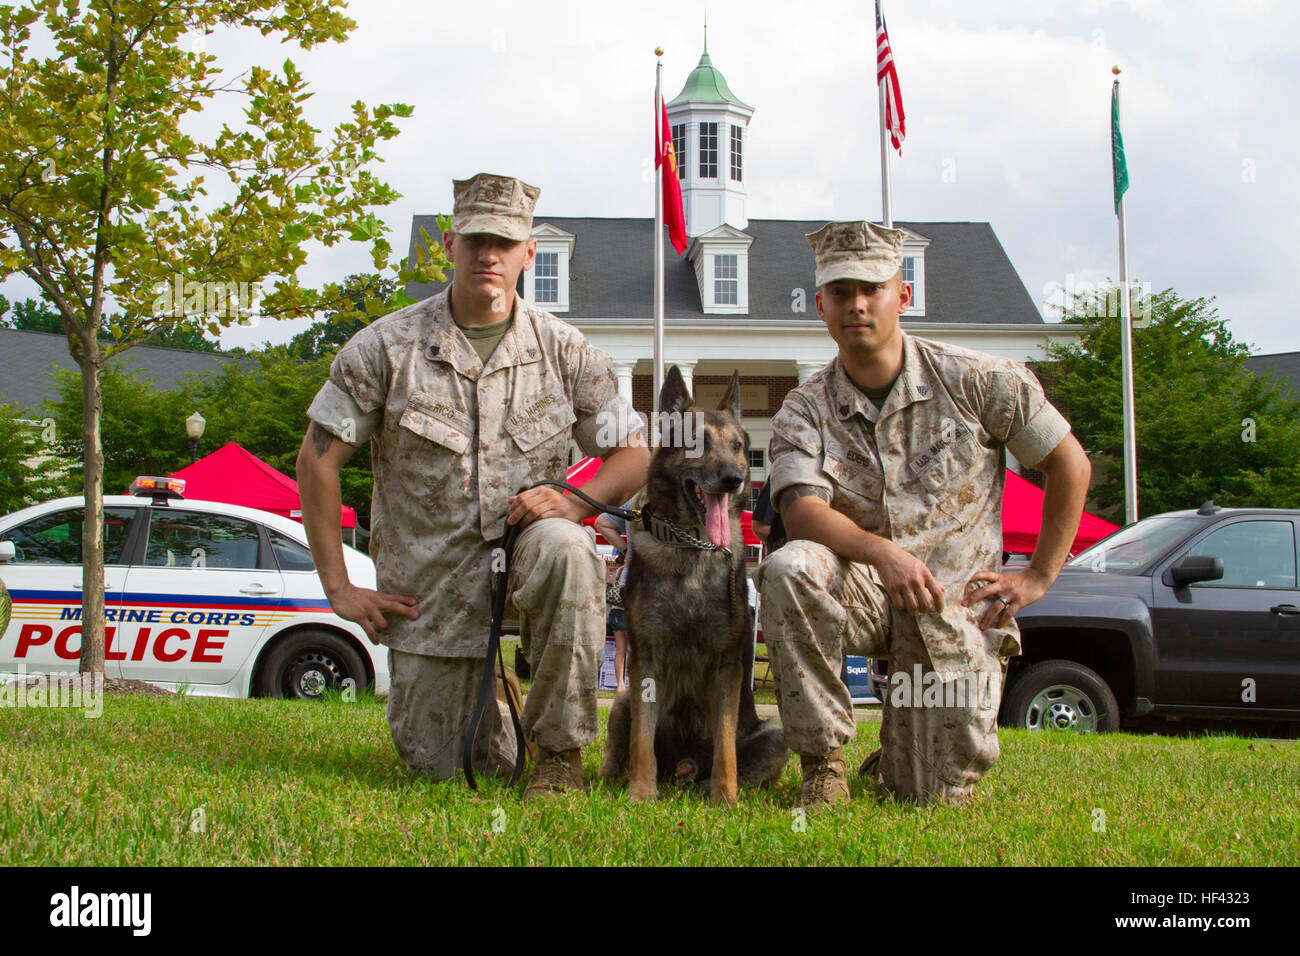 Sergeant Shawn R. Edens (right) and Cpl. Braxton H. Rico (left) pose for a picture with Segal (middle) before the 2016 National Night Out begins outside of Lincoln Military Housing aboard Marine Corps Base Quantico, Va., Aug. 2. The purpose of the event is to strengthen relationships between police forces and community partnerships while increasing public awareness of Quantico’s Security Battalion. Edens and Rico are assigned to Security Battalion aboard MCB Quantico. Segal is a German shepherd who was Edens’ last dog to handle, but is now Rico’s first. Pack Leader, Marine Military Working Dog Stock Photo